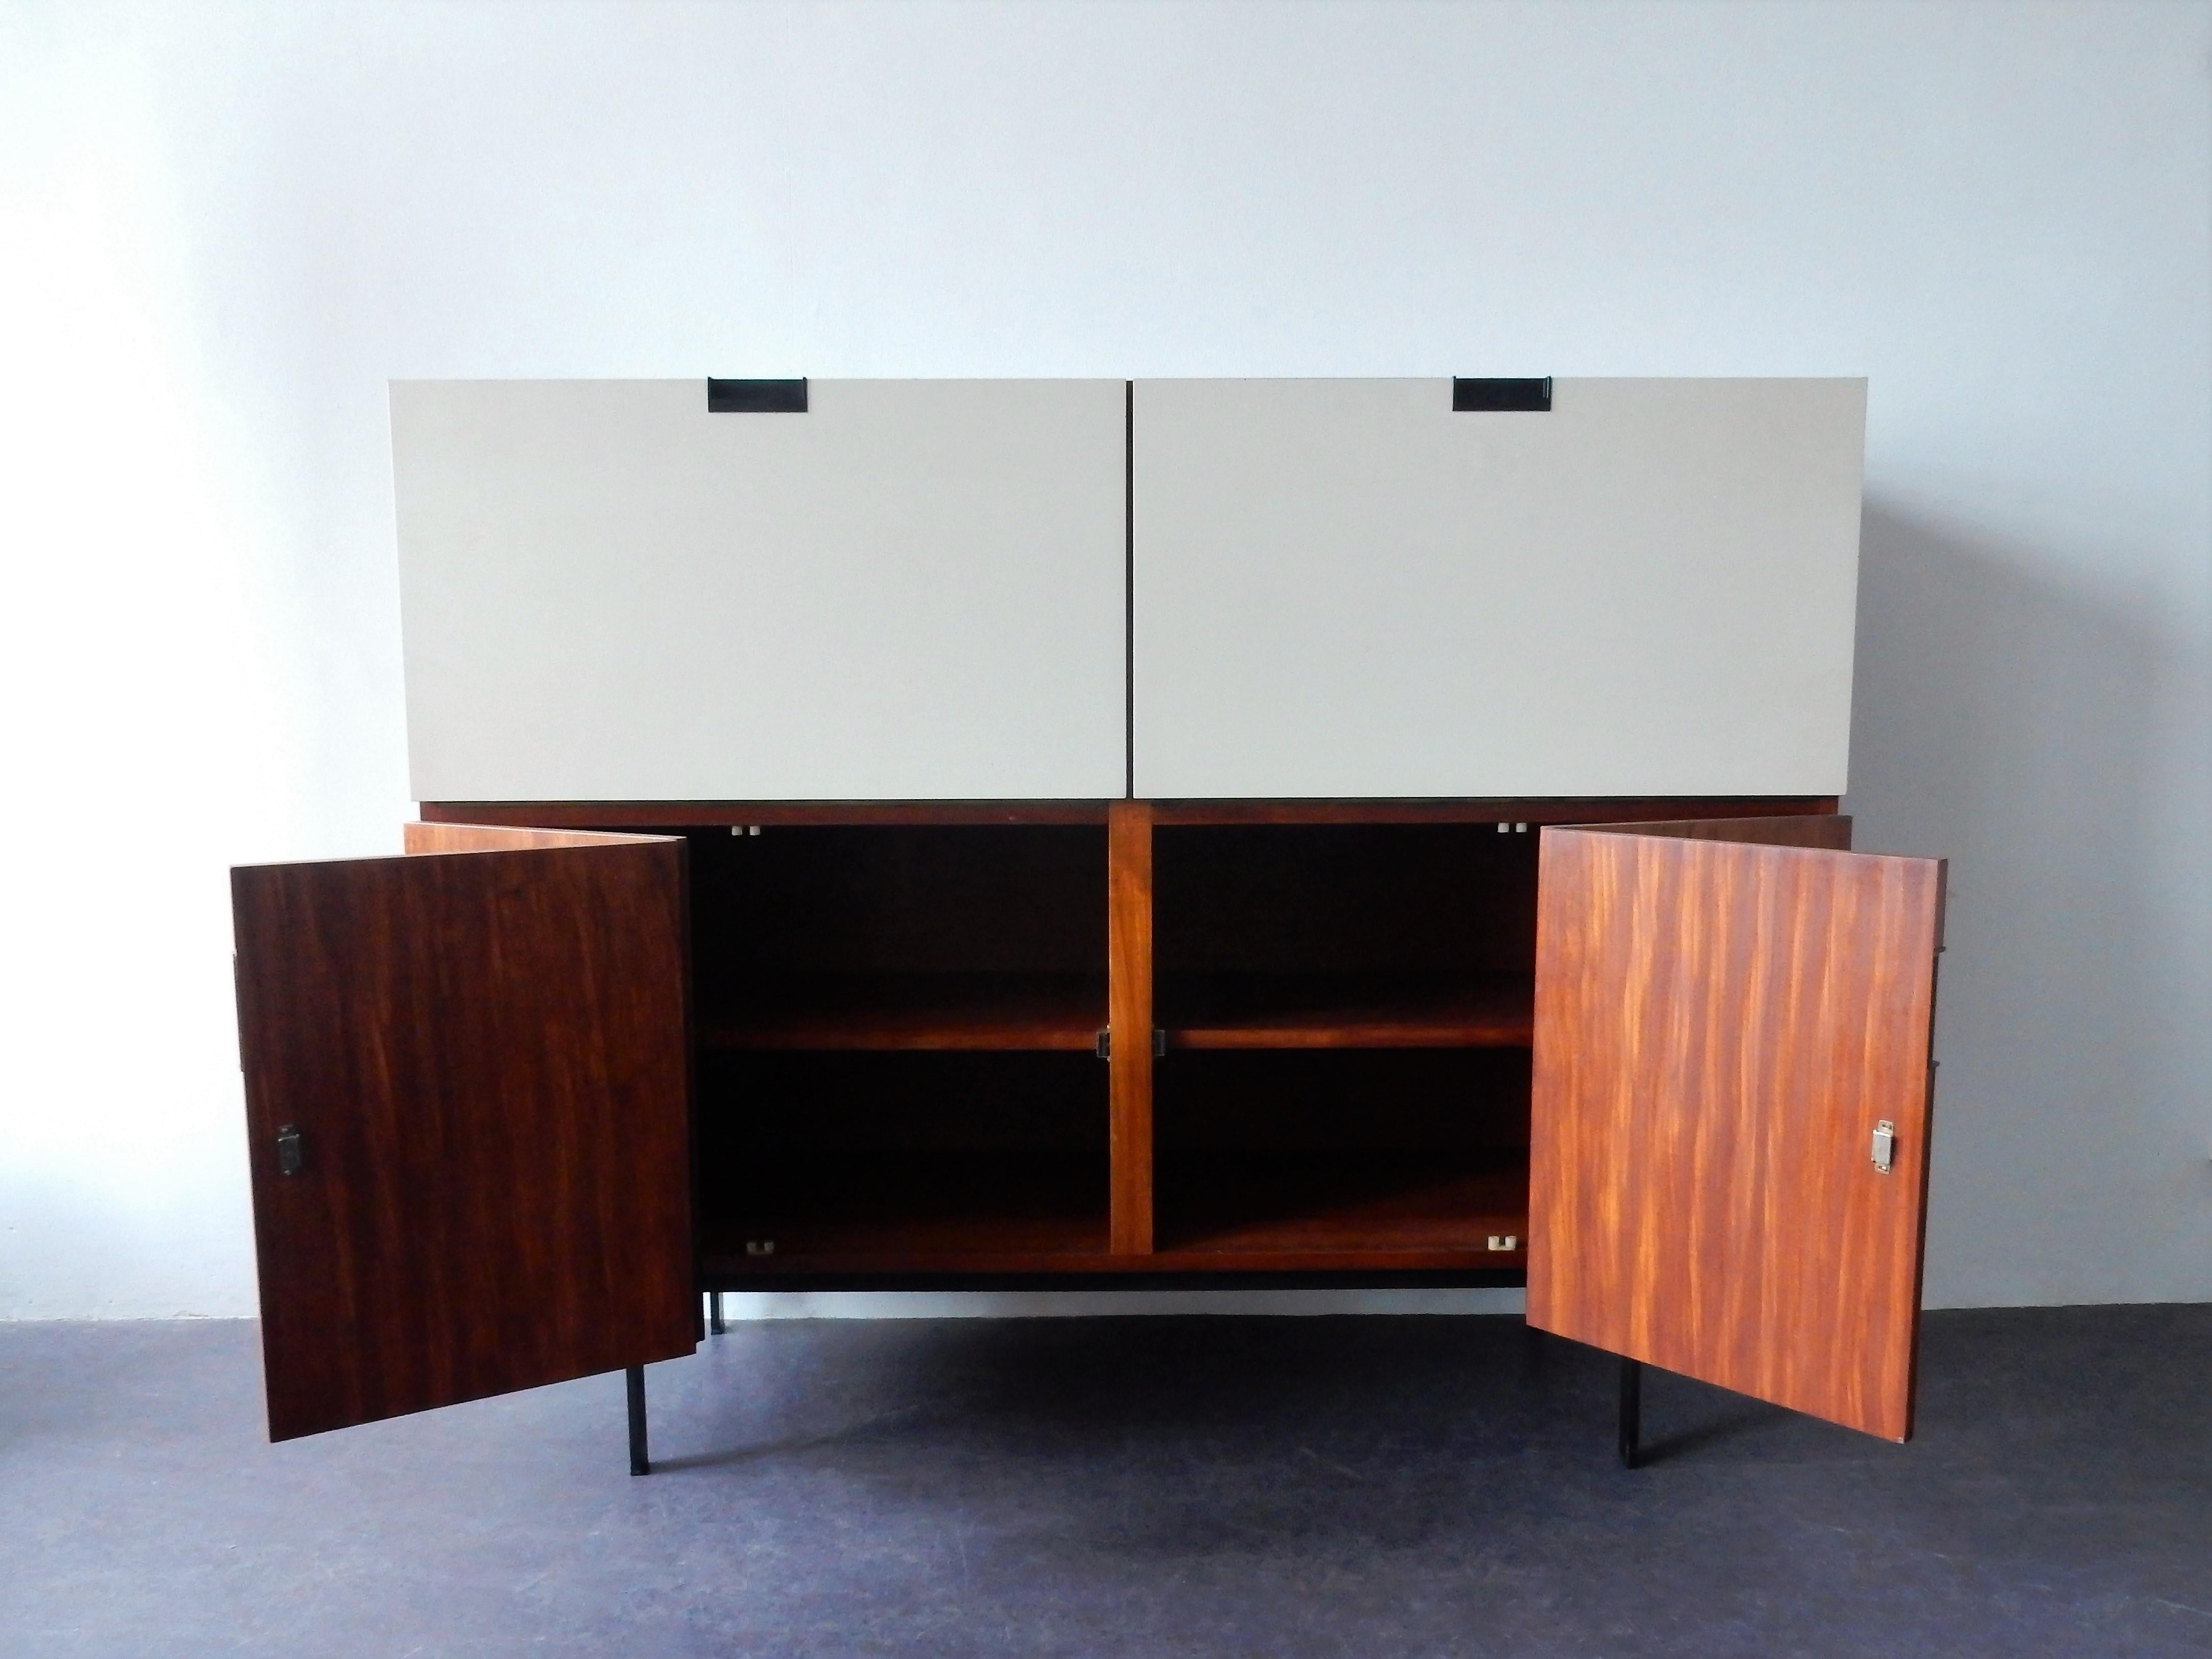 This very nice and highly collectable highboard, from the Japanese series, was designed by Cees Braakman for Pastoe in 1958. The cabinet is made from teak veneer combined with two white lacquered dropdown doors, iconic black integrated handles and a